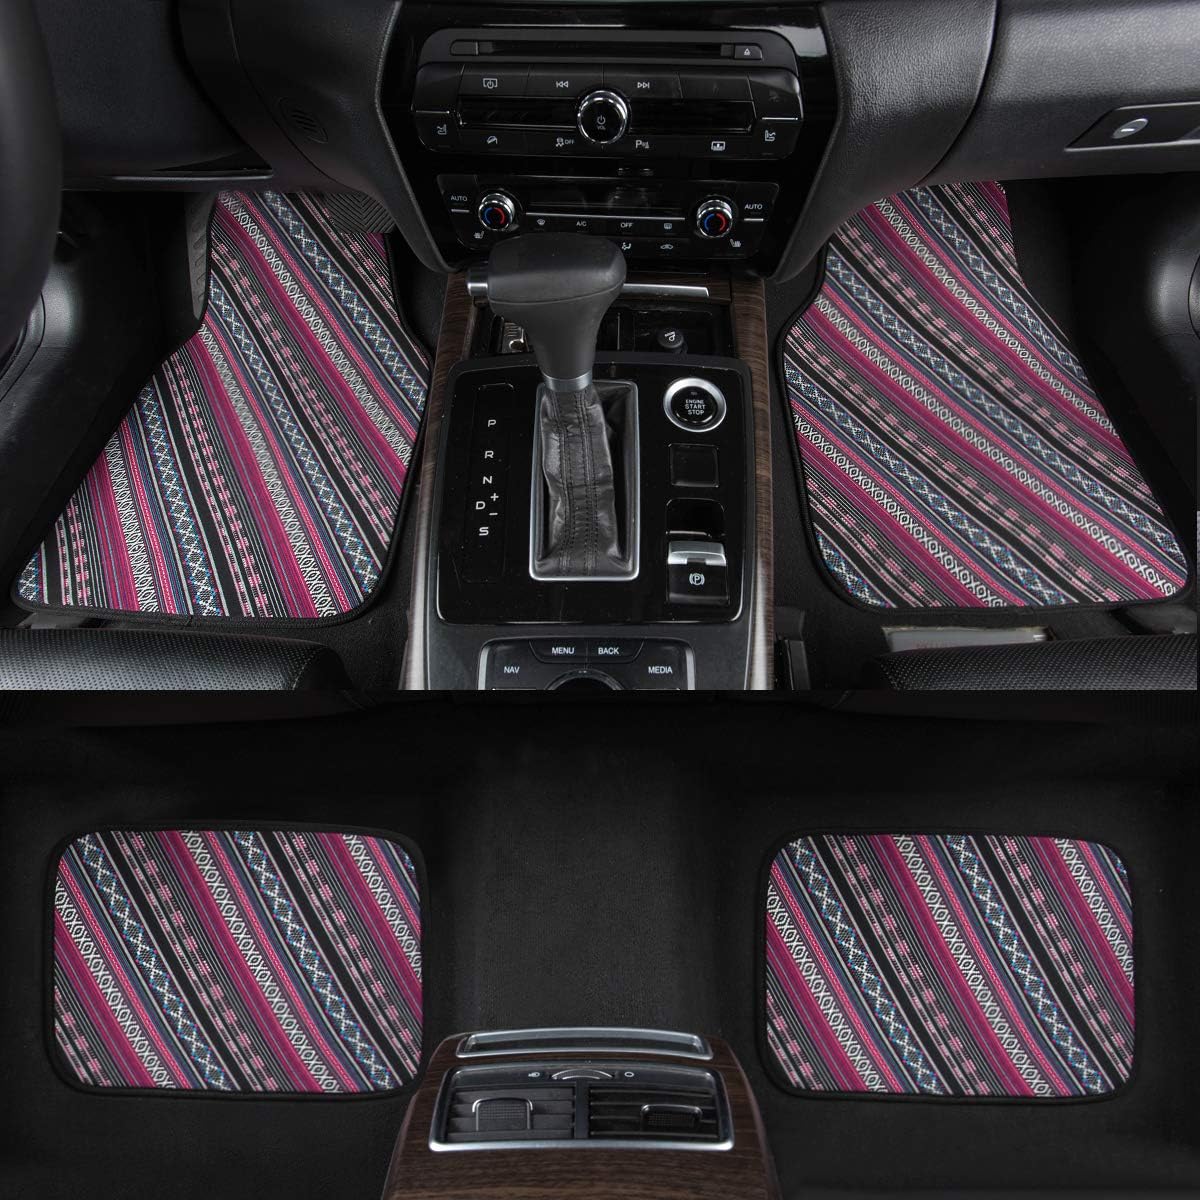 CAR Pass Baja Saddle Blanket Boho Paisley Stripes Ethnic Style Car Interior Combo, Universal Fit for Car,SUV,Sedan,Truck,Jeep,Airbag Compatible 7 Pieces